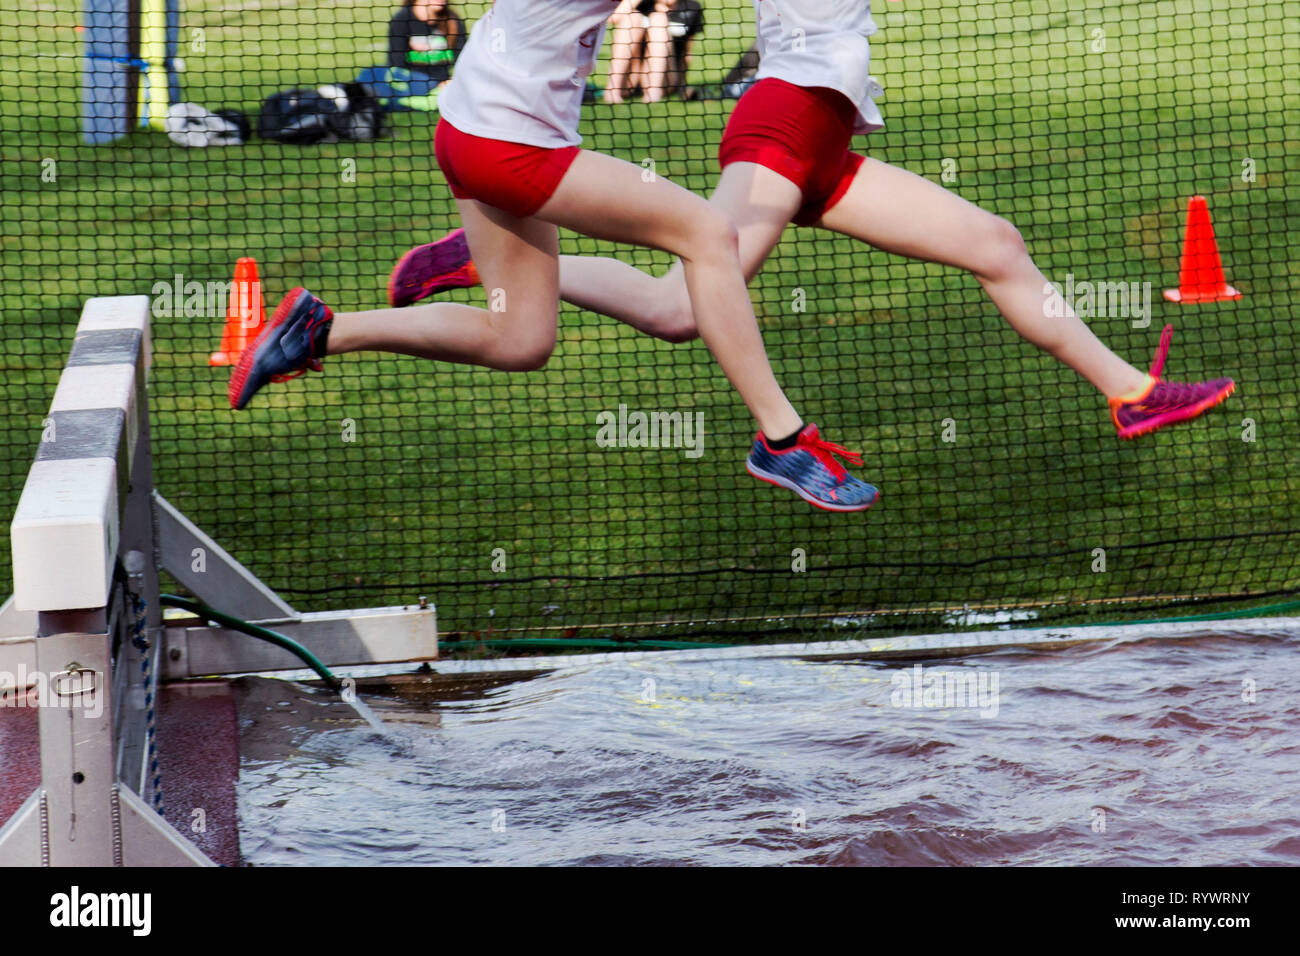 Two high school girls going over the water pit in a steeplechase race Stock Photo